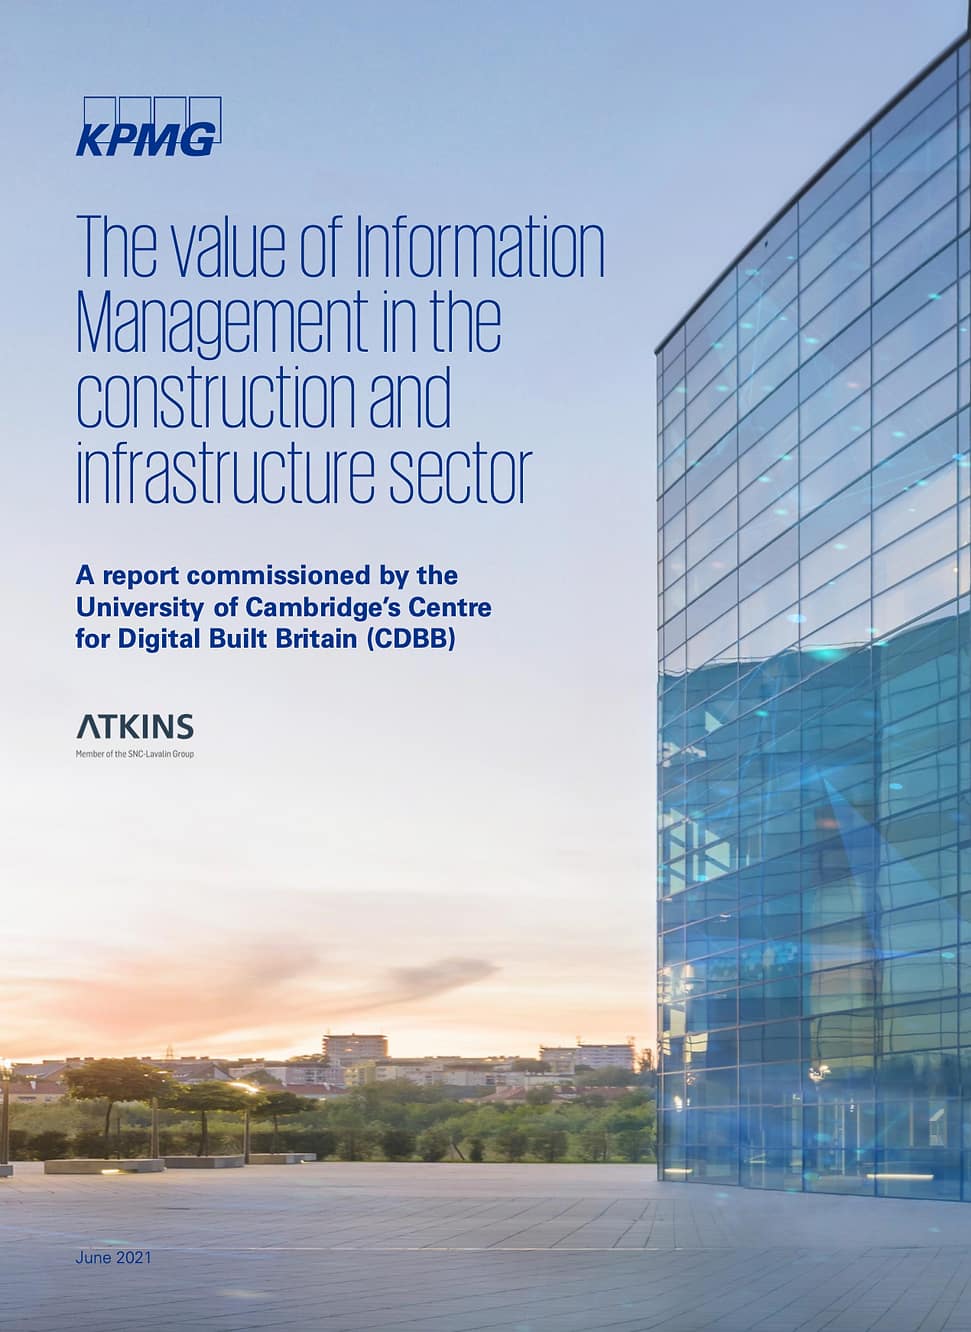 The Value of Information Management in the Construction and Infrastructure Sector